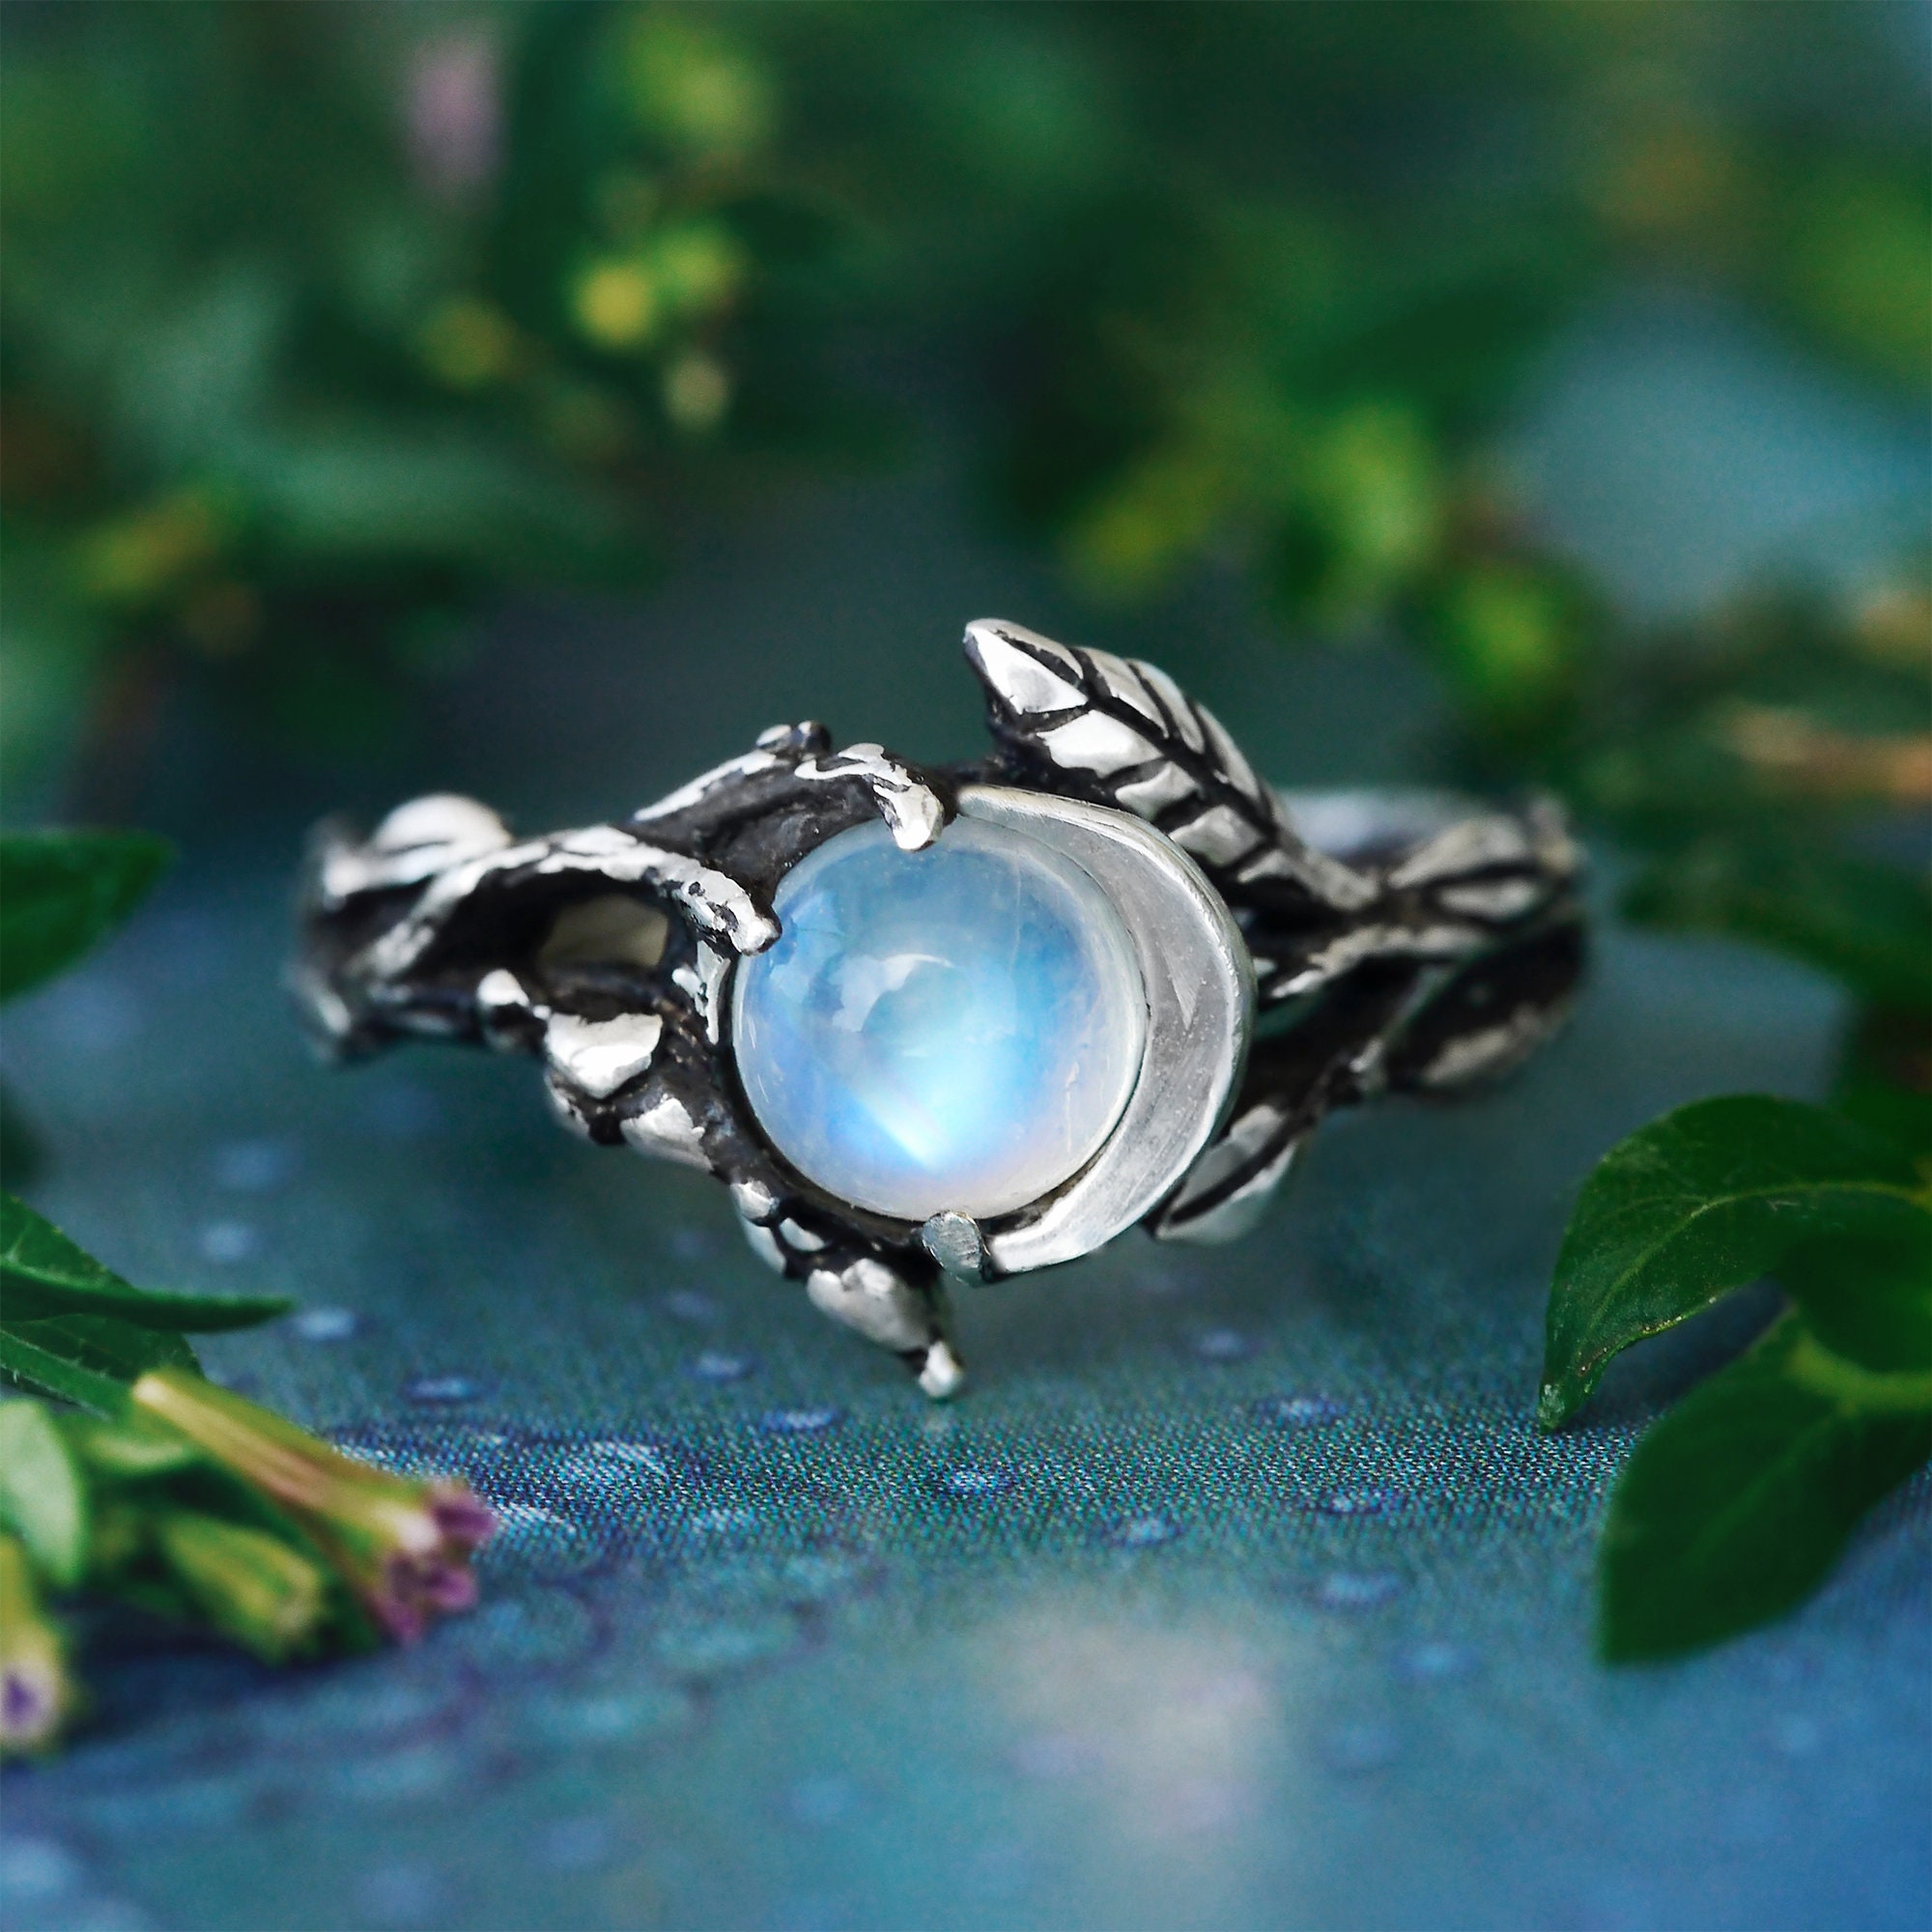 Gift For Love Gemstone Jewelry Gift For Her Moonstone Silver Ring Gift Ring For Mom Rainbow Moonstone Ring 7.5 Moonstone Miss You Ring